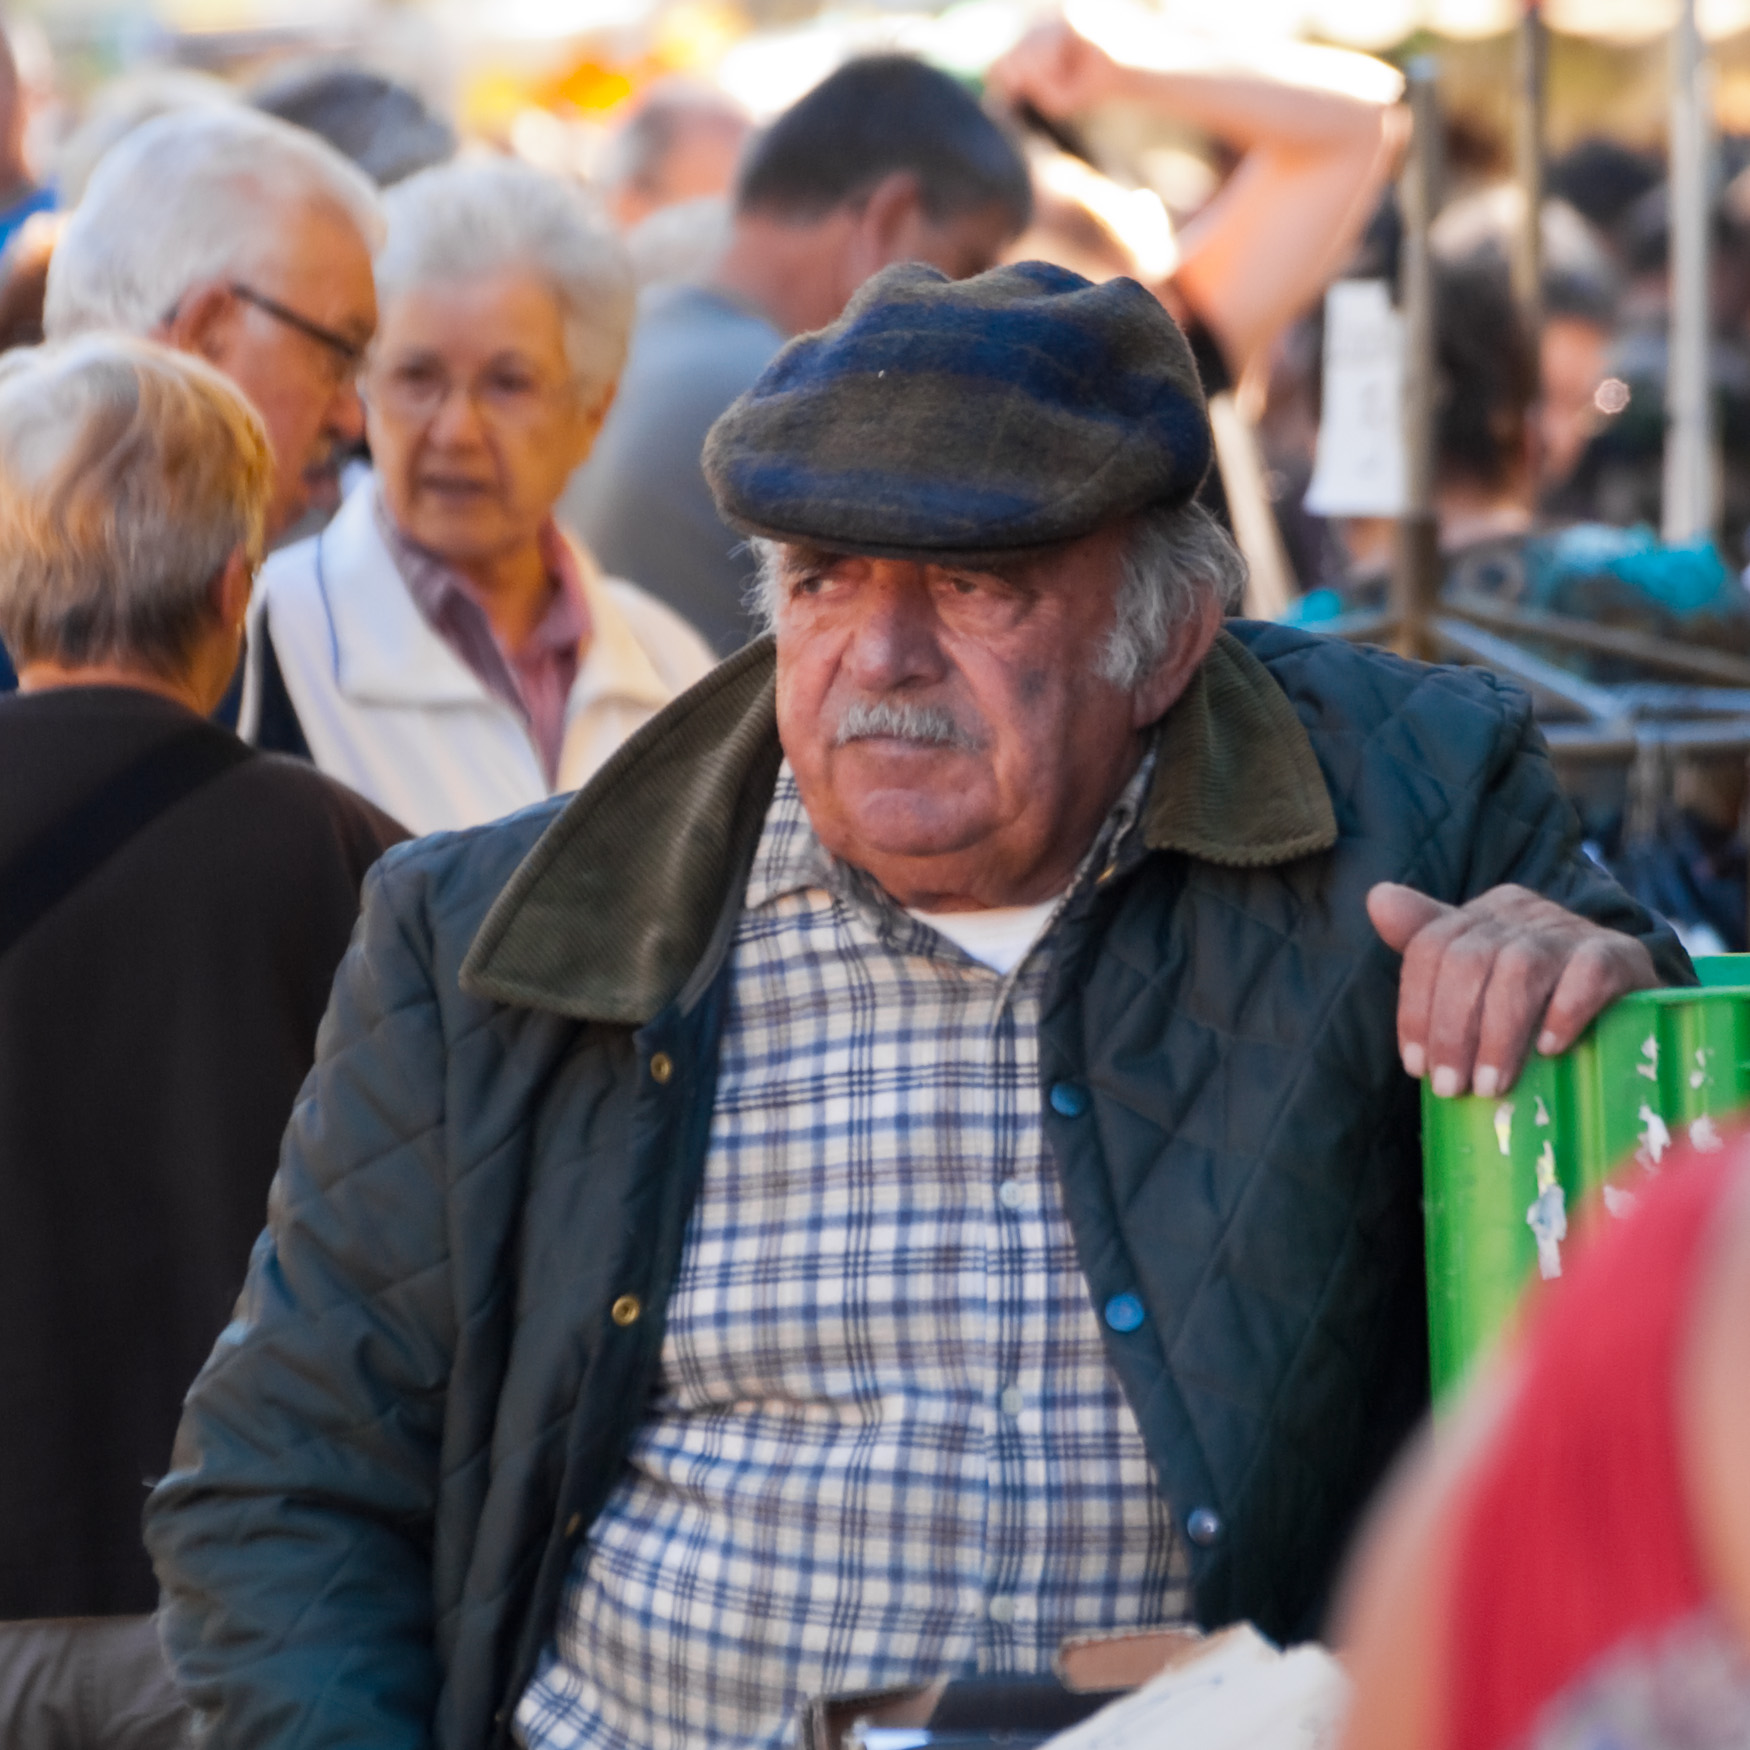 Ardeche - Trader at the weekly market